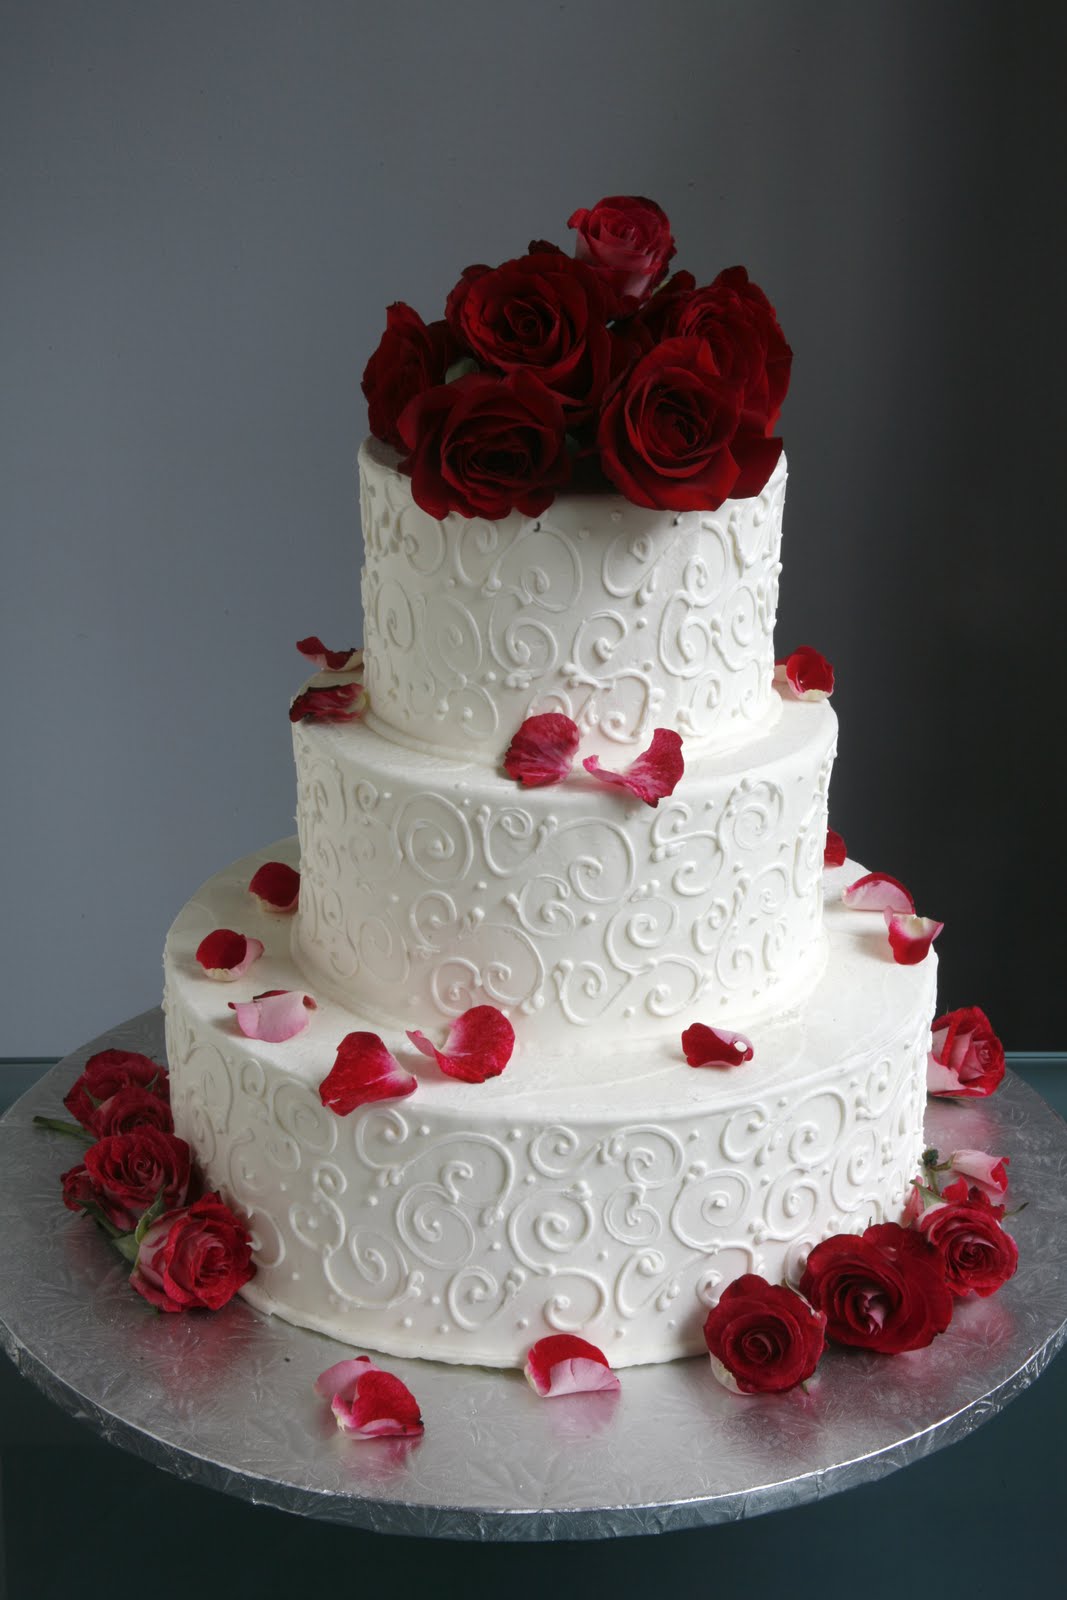 Wedding cakes with roses images